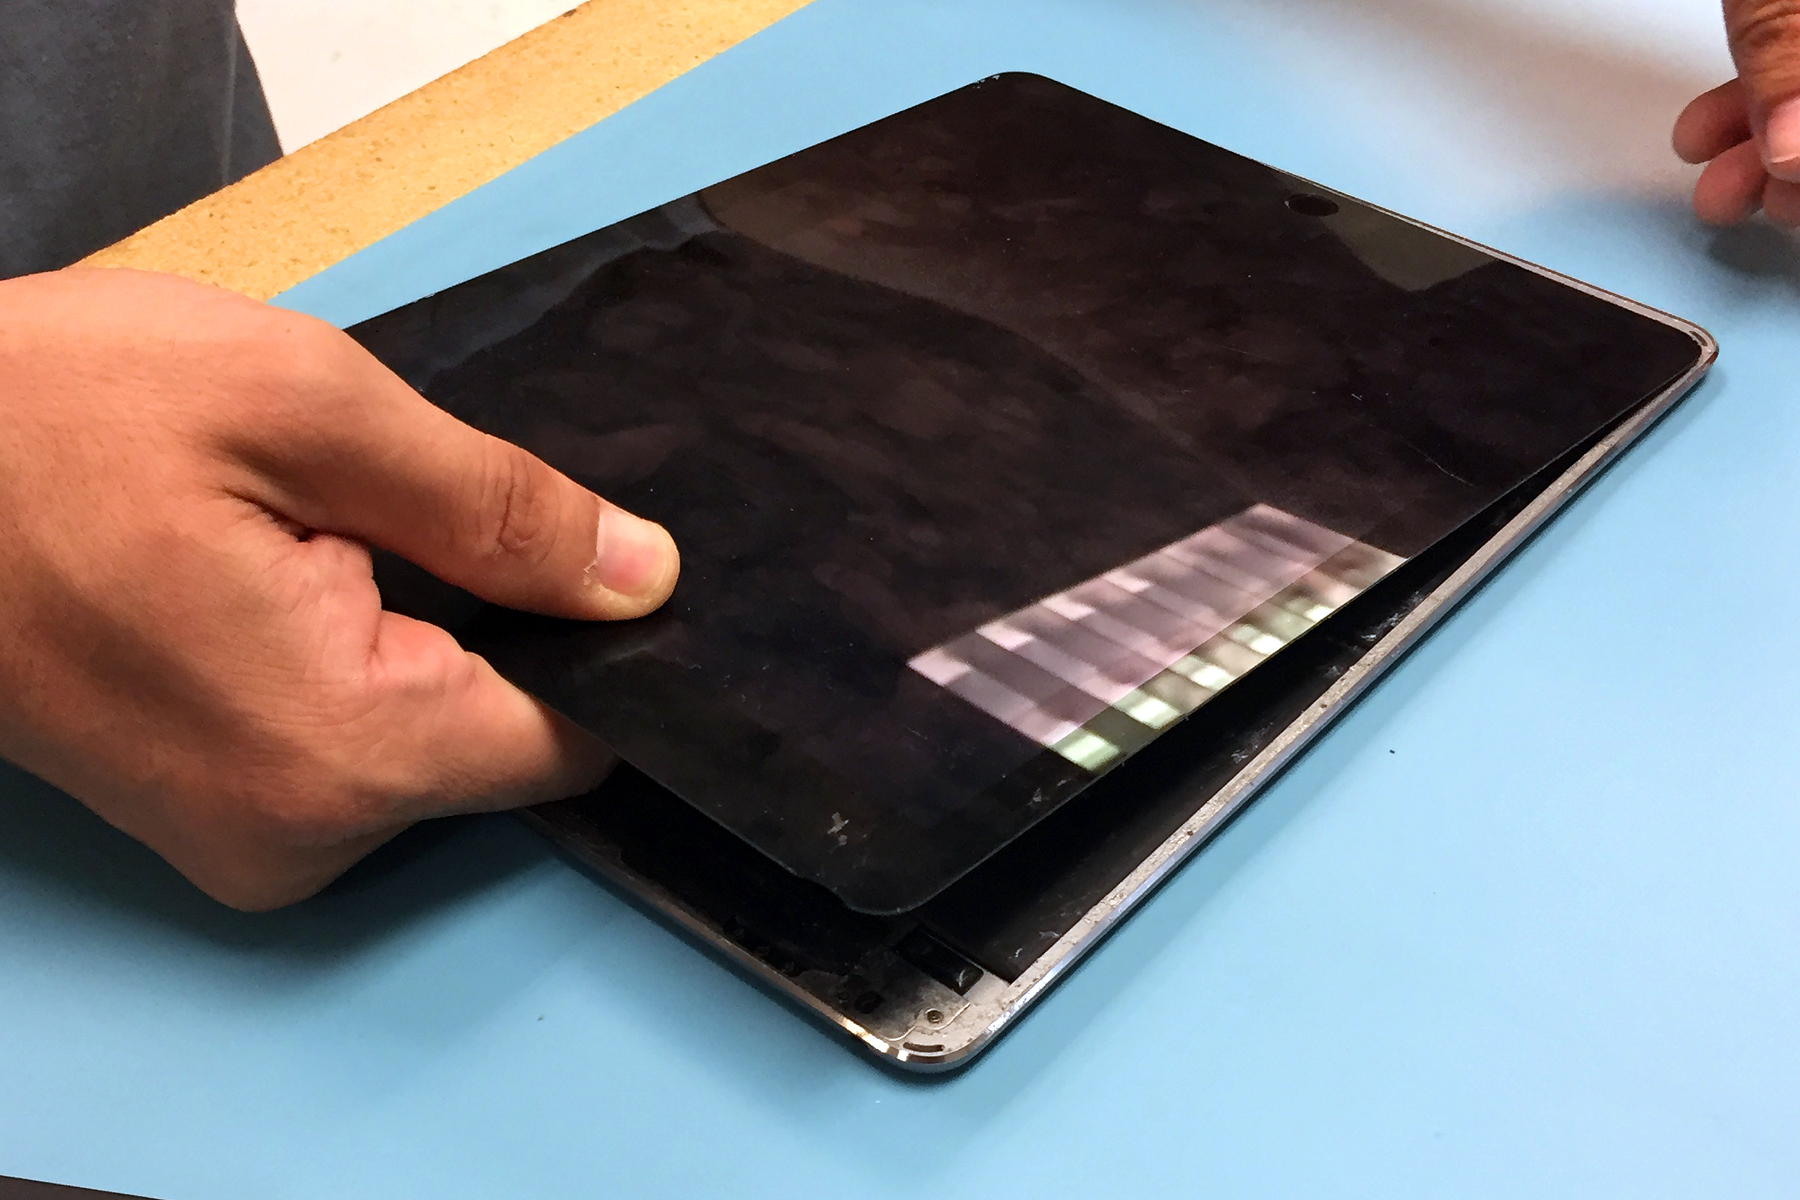 iPad Air 2 LCD Removal steps - a tutorial